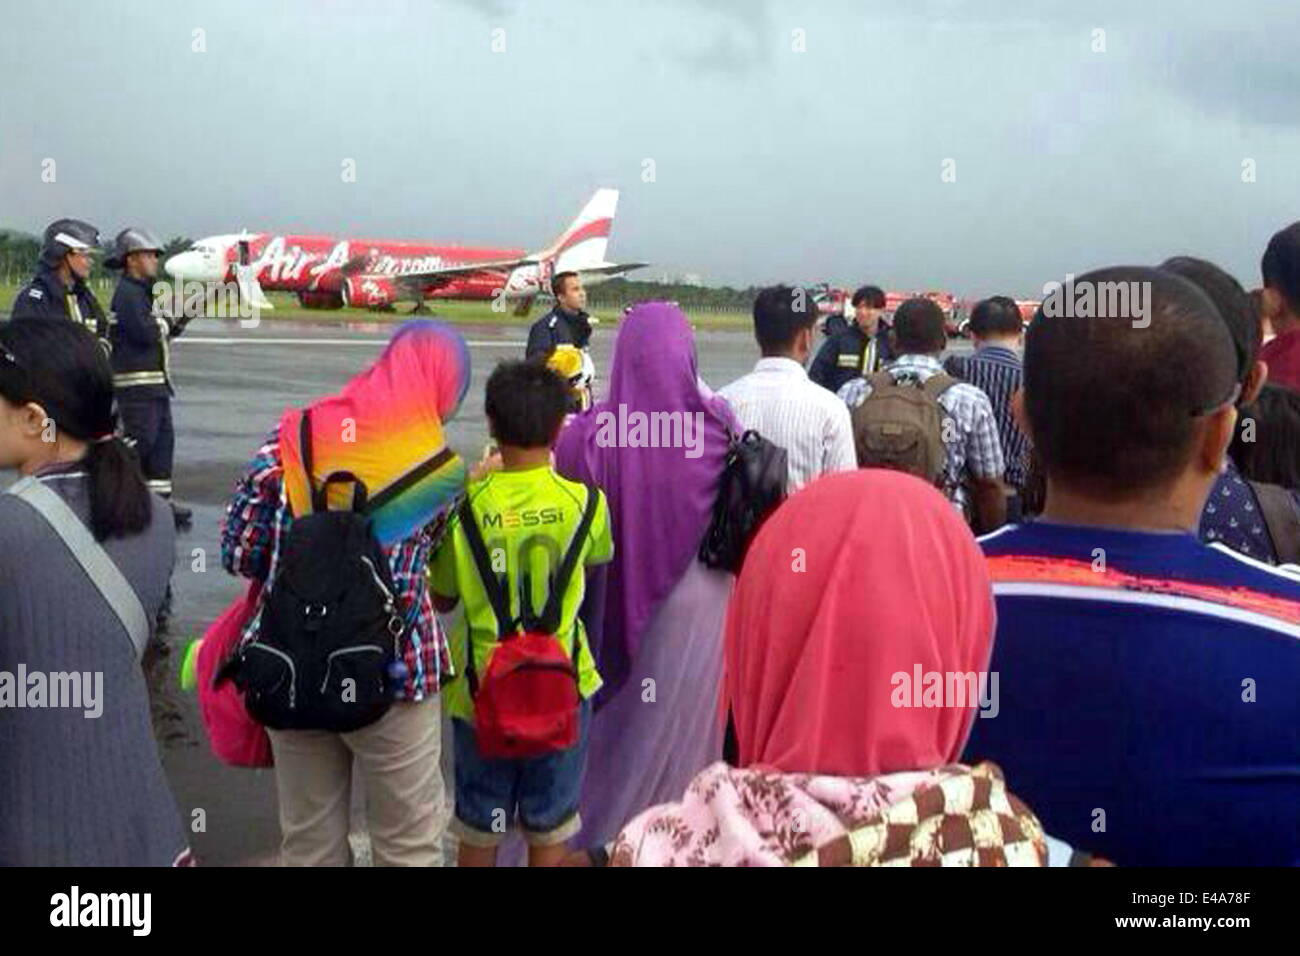 Bandar Seri Begawan, Brunei. 7th July, 2014. Passengers carry their luggages at the Brunei International Airport in Bandar Seri Begawan, Brunei, July 7, 2014. An AirAsia flight AK278 with 102 passengers and seven crew members on board from Kuala Lumpur to Brunei skidded the runway at the Brunei International Airport Monday afternoon while it was trying to land during a heavy rain in the counry. Nobody was injured in the accident. Credit:  Jeffrey Wong/Xinhua/Alamy Live News Stock Photo